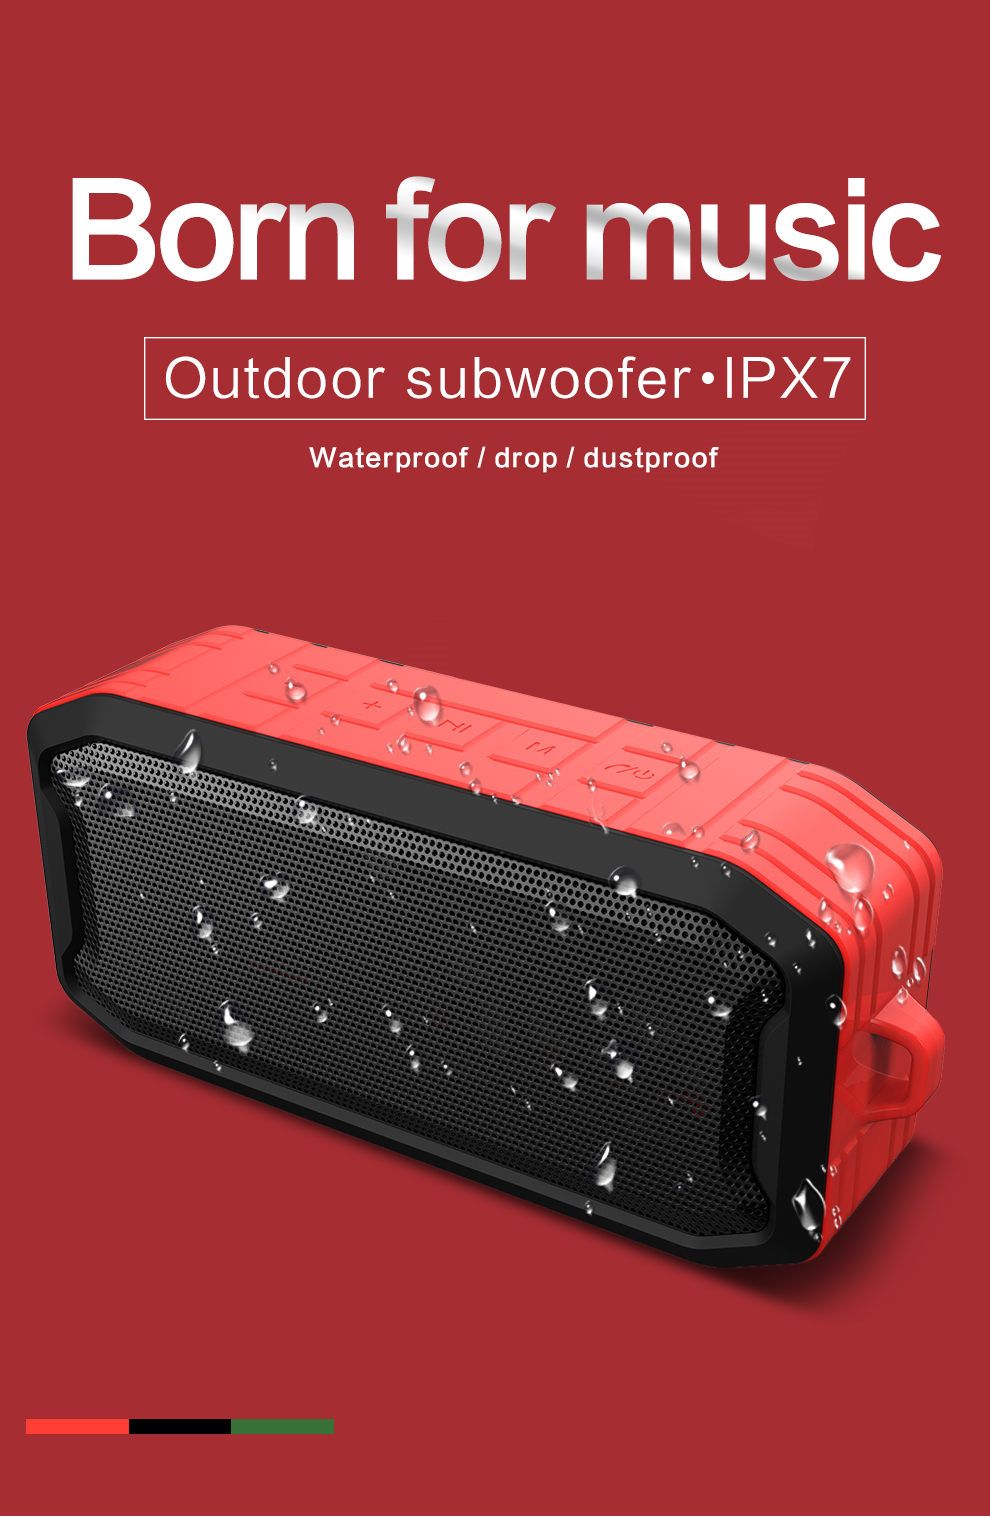 Bakeey-Y3-Wireless-bluetooth-V50-Speaker-Outdoors-Climbing-Portable-Subwoofer-TF-Card-Handsfree-IPX7-1631044